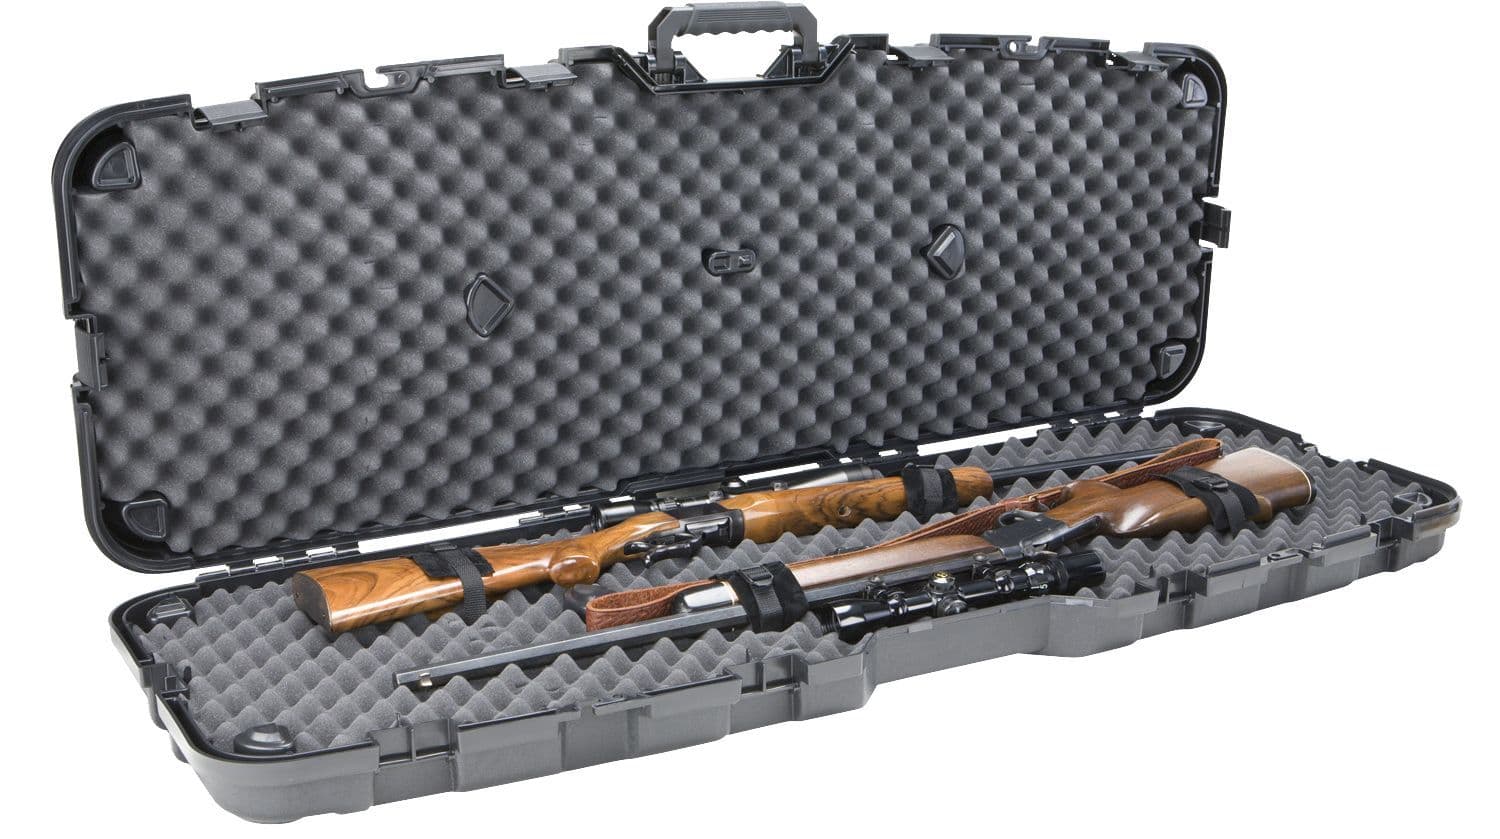 PLANO PRO MAX SIDE-BY-SIDE RIFLE CASE